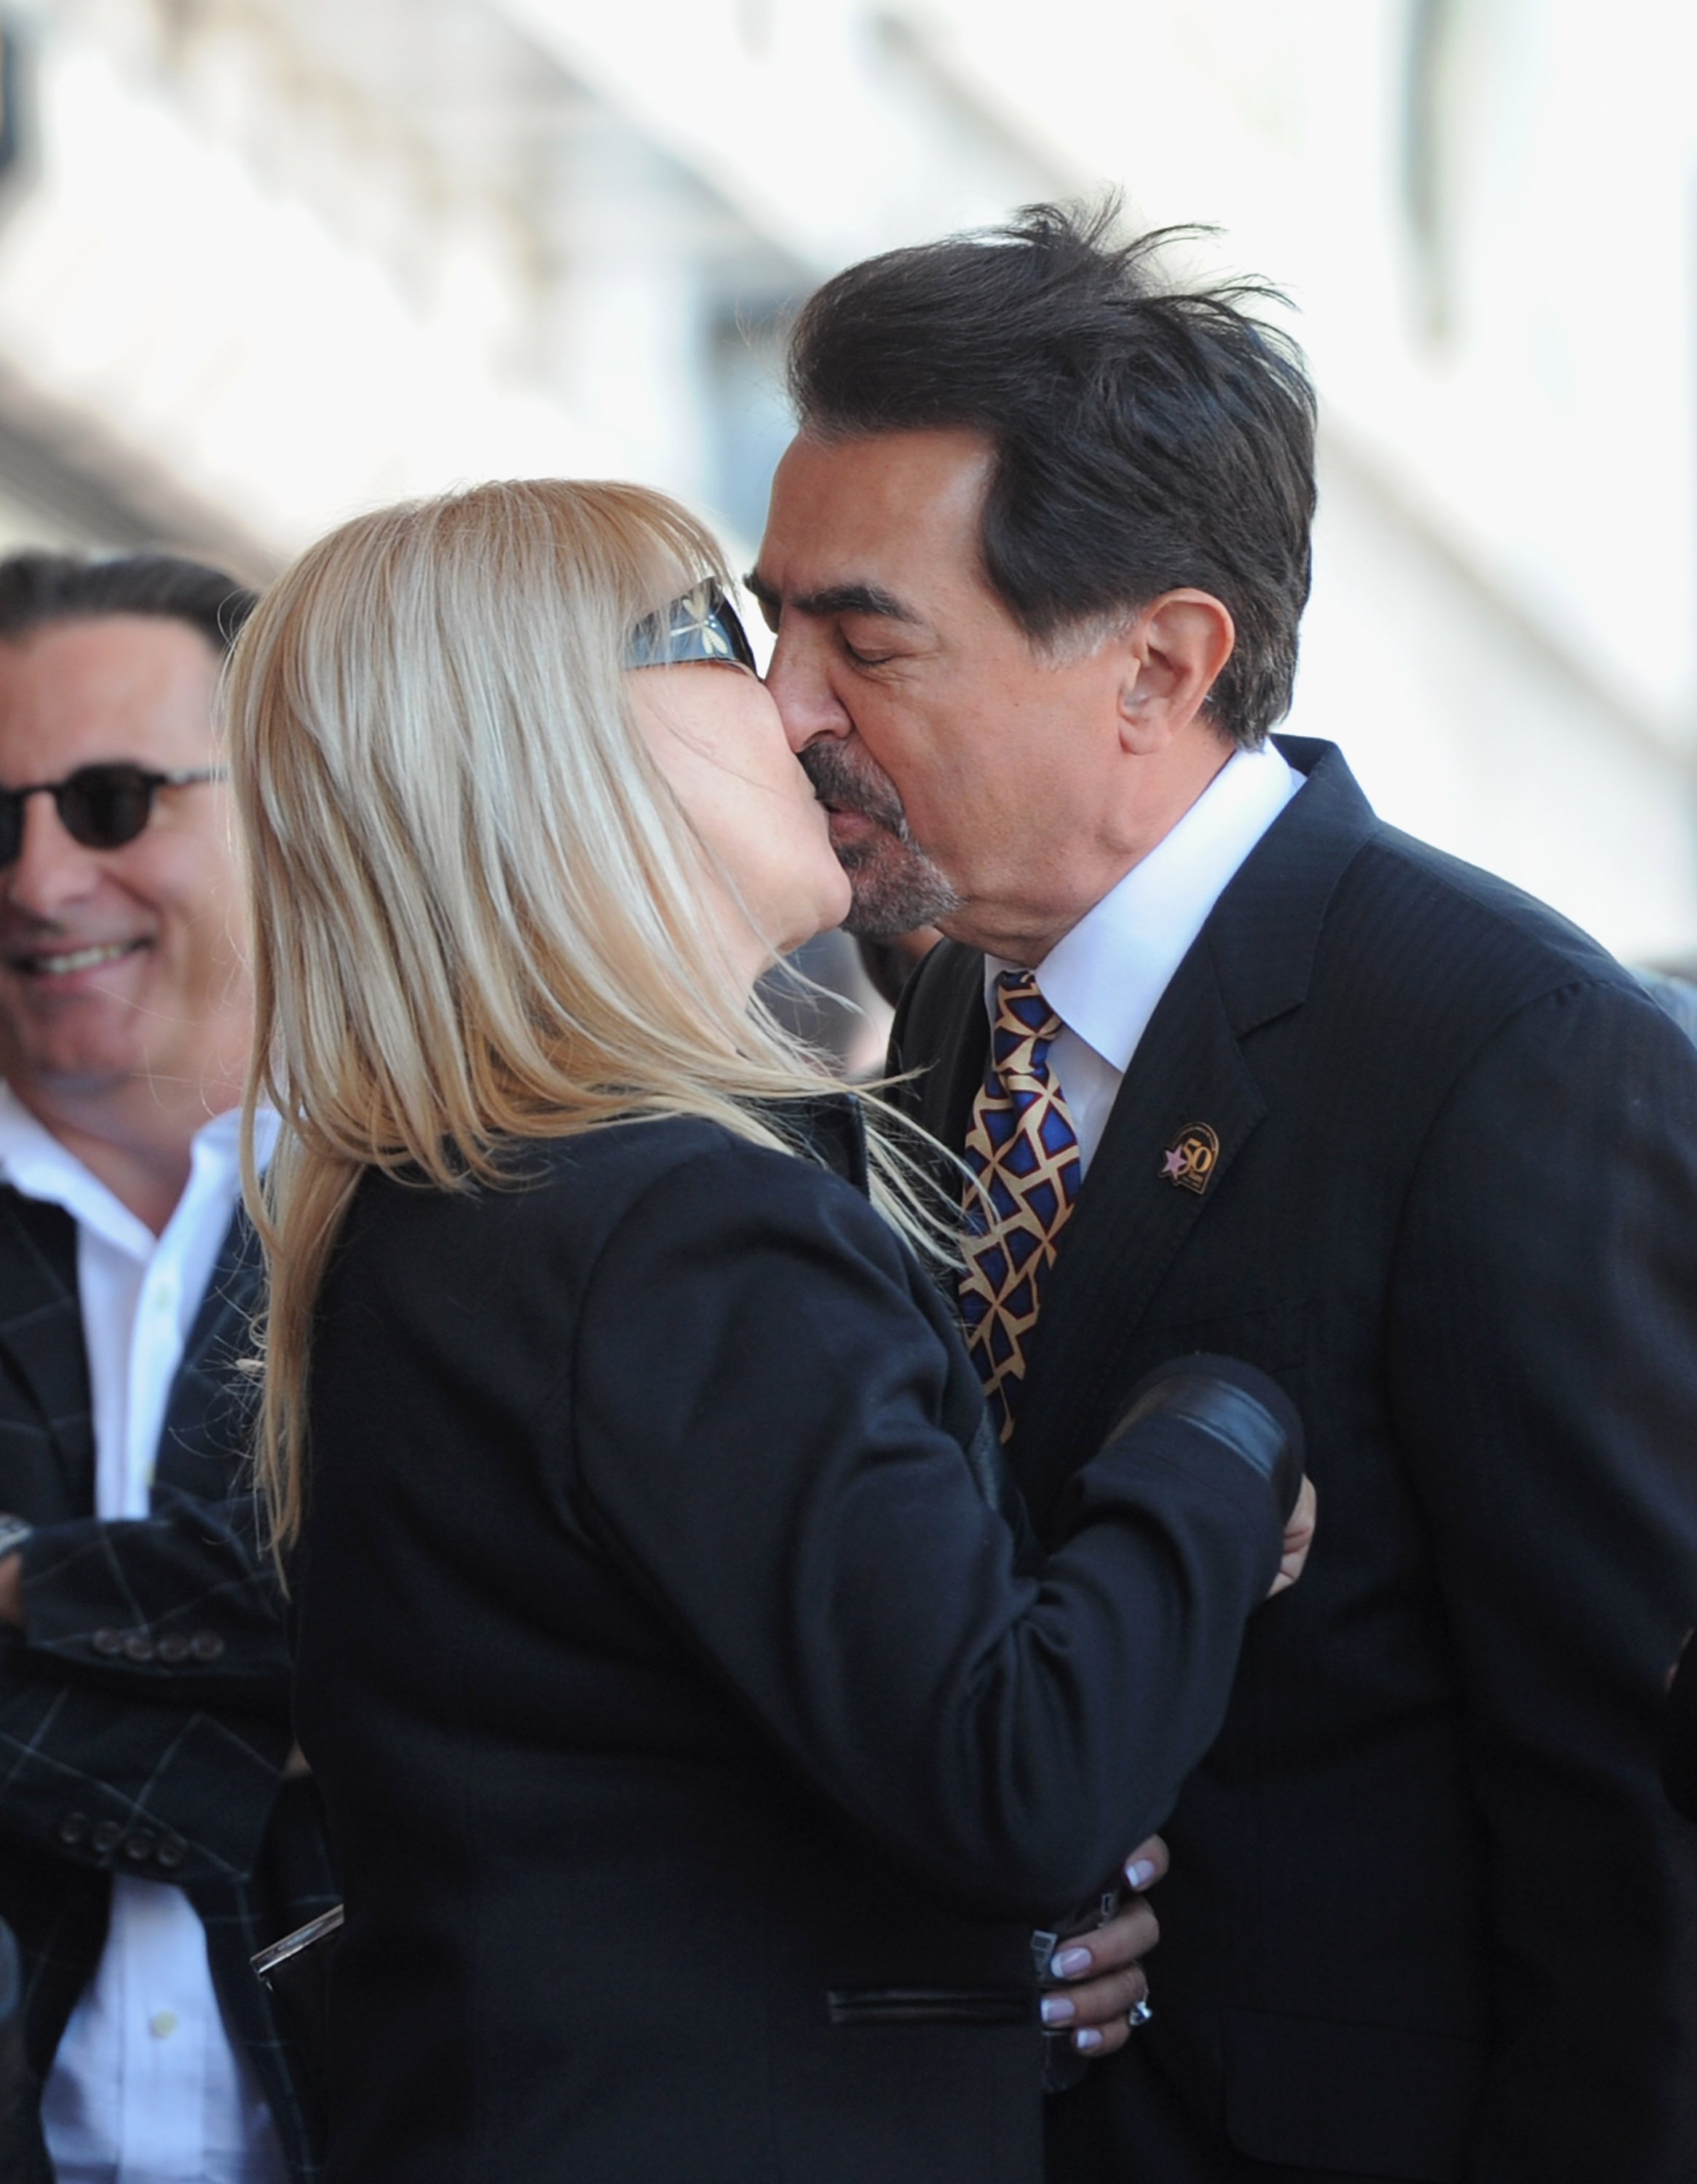 Joe Mantegna and Arlene Vrhel at the star ceremony honoring Joe Mantegna with his star on the Hollywood Walk of Fame on April 29, 2011 | Source: Getty Images